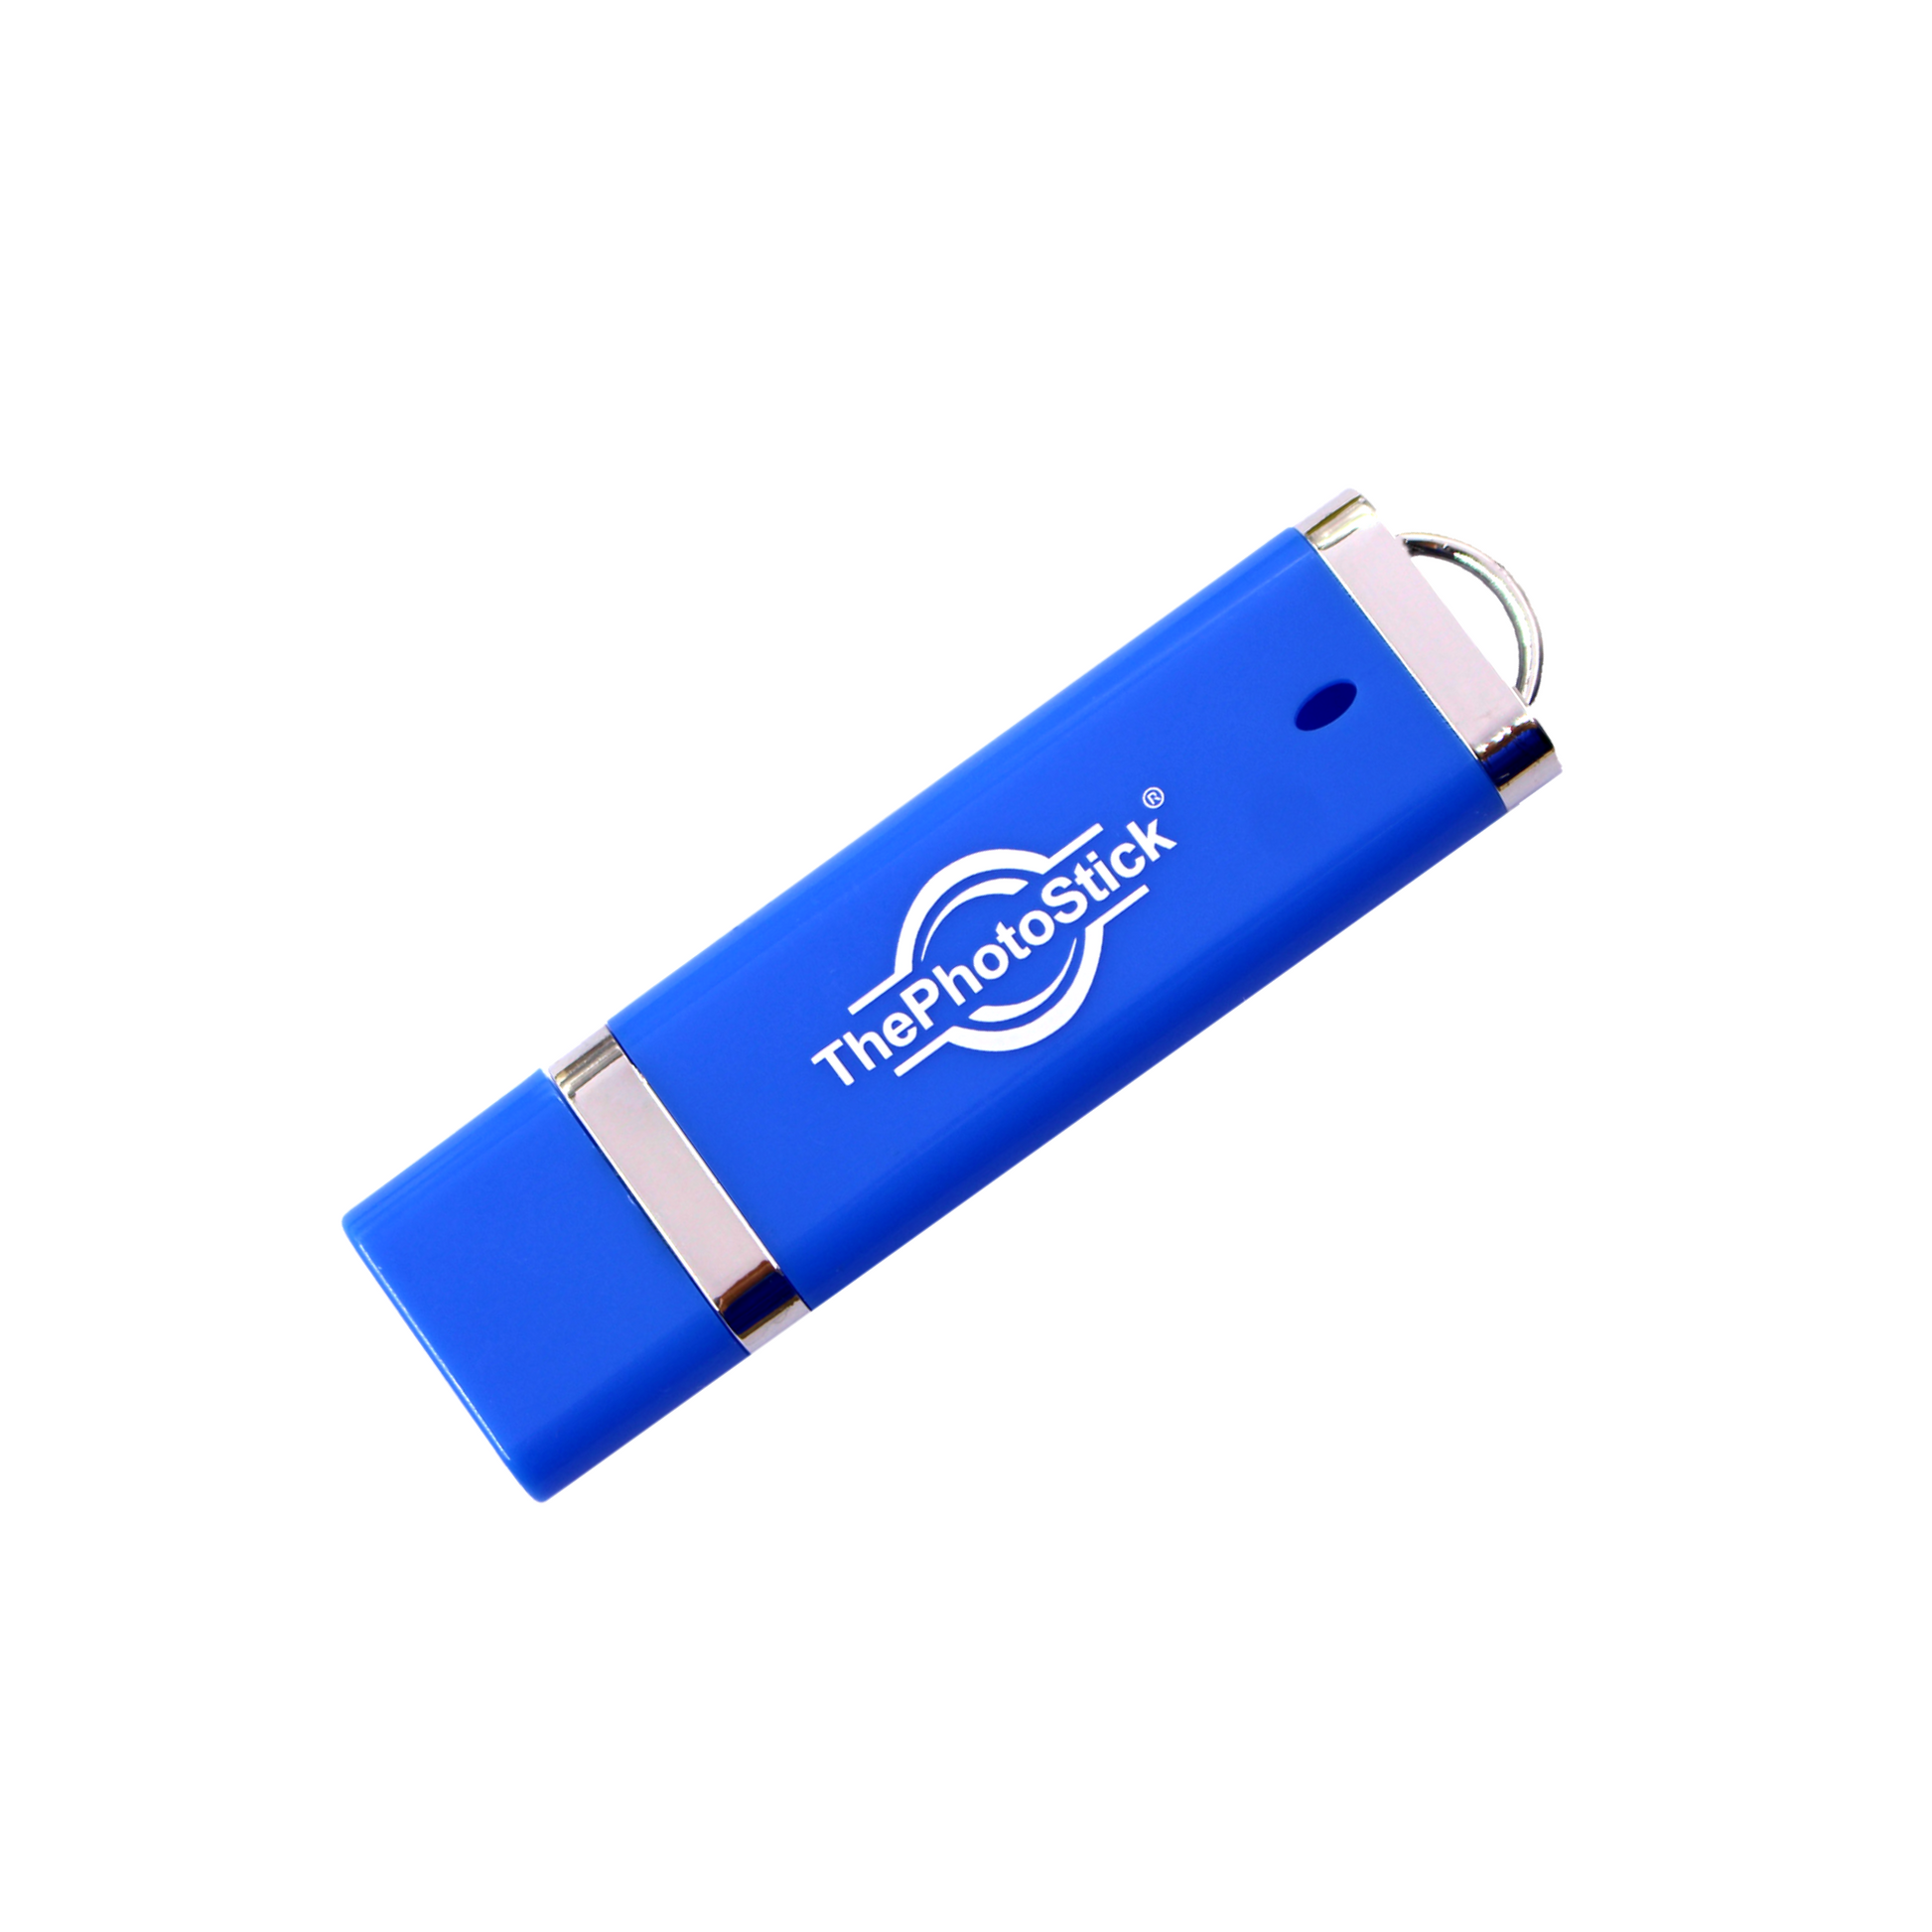 Thephotostick 256 GB for PC and Mac, Size: 256GB, Blue